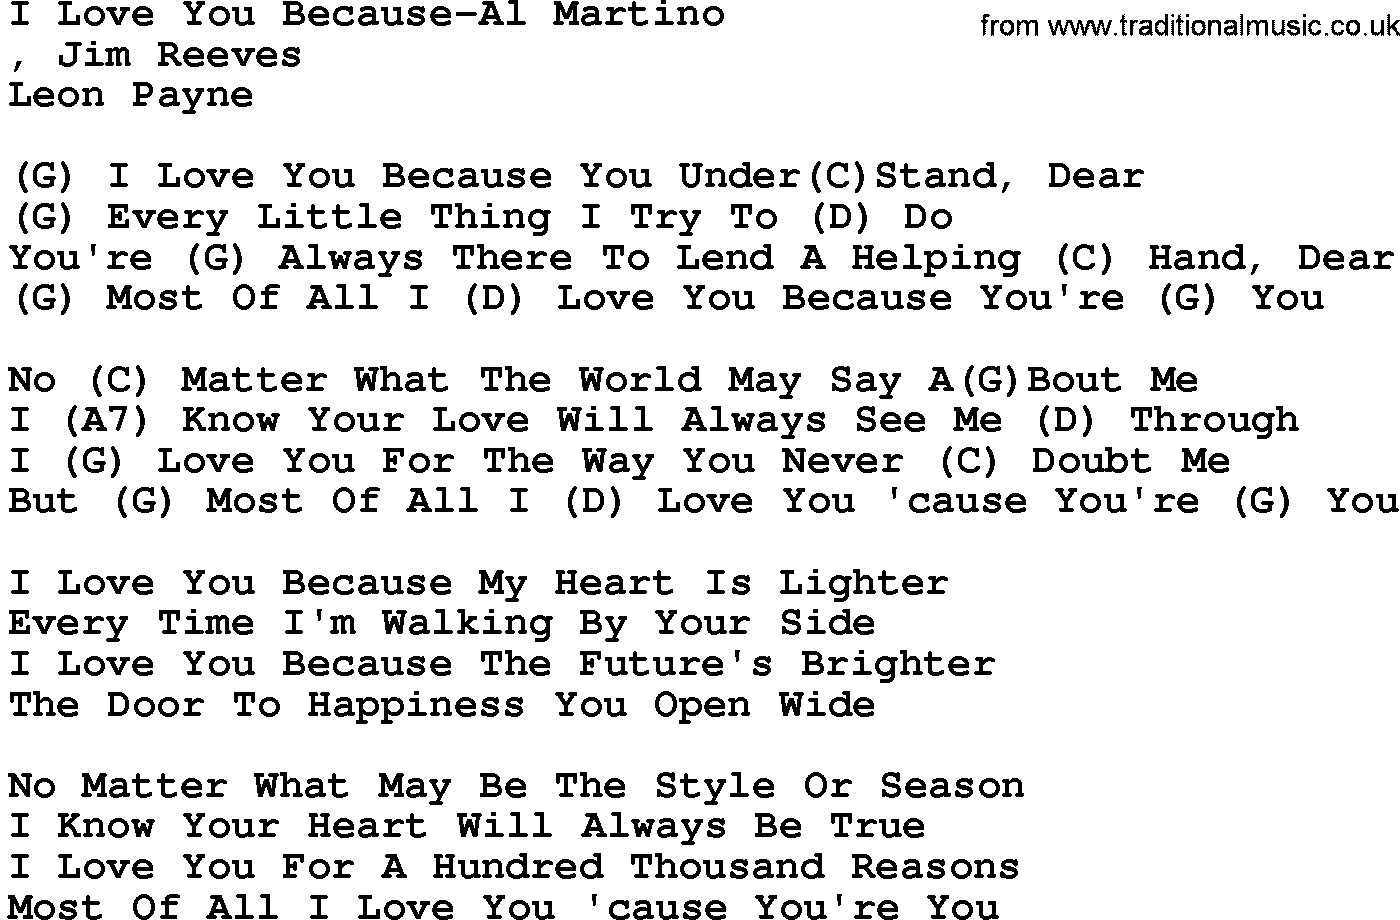 Country music song: I Love You Because-Al Martino lyrics and chords